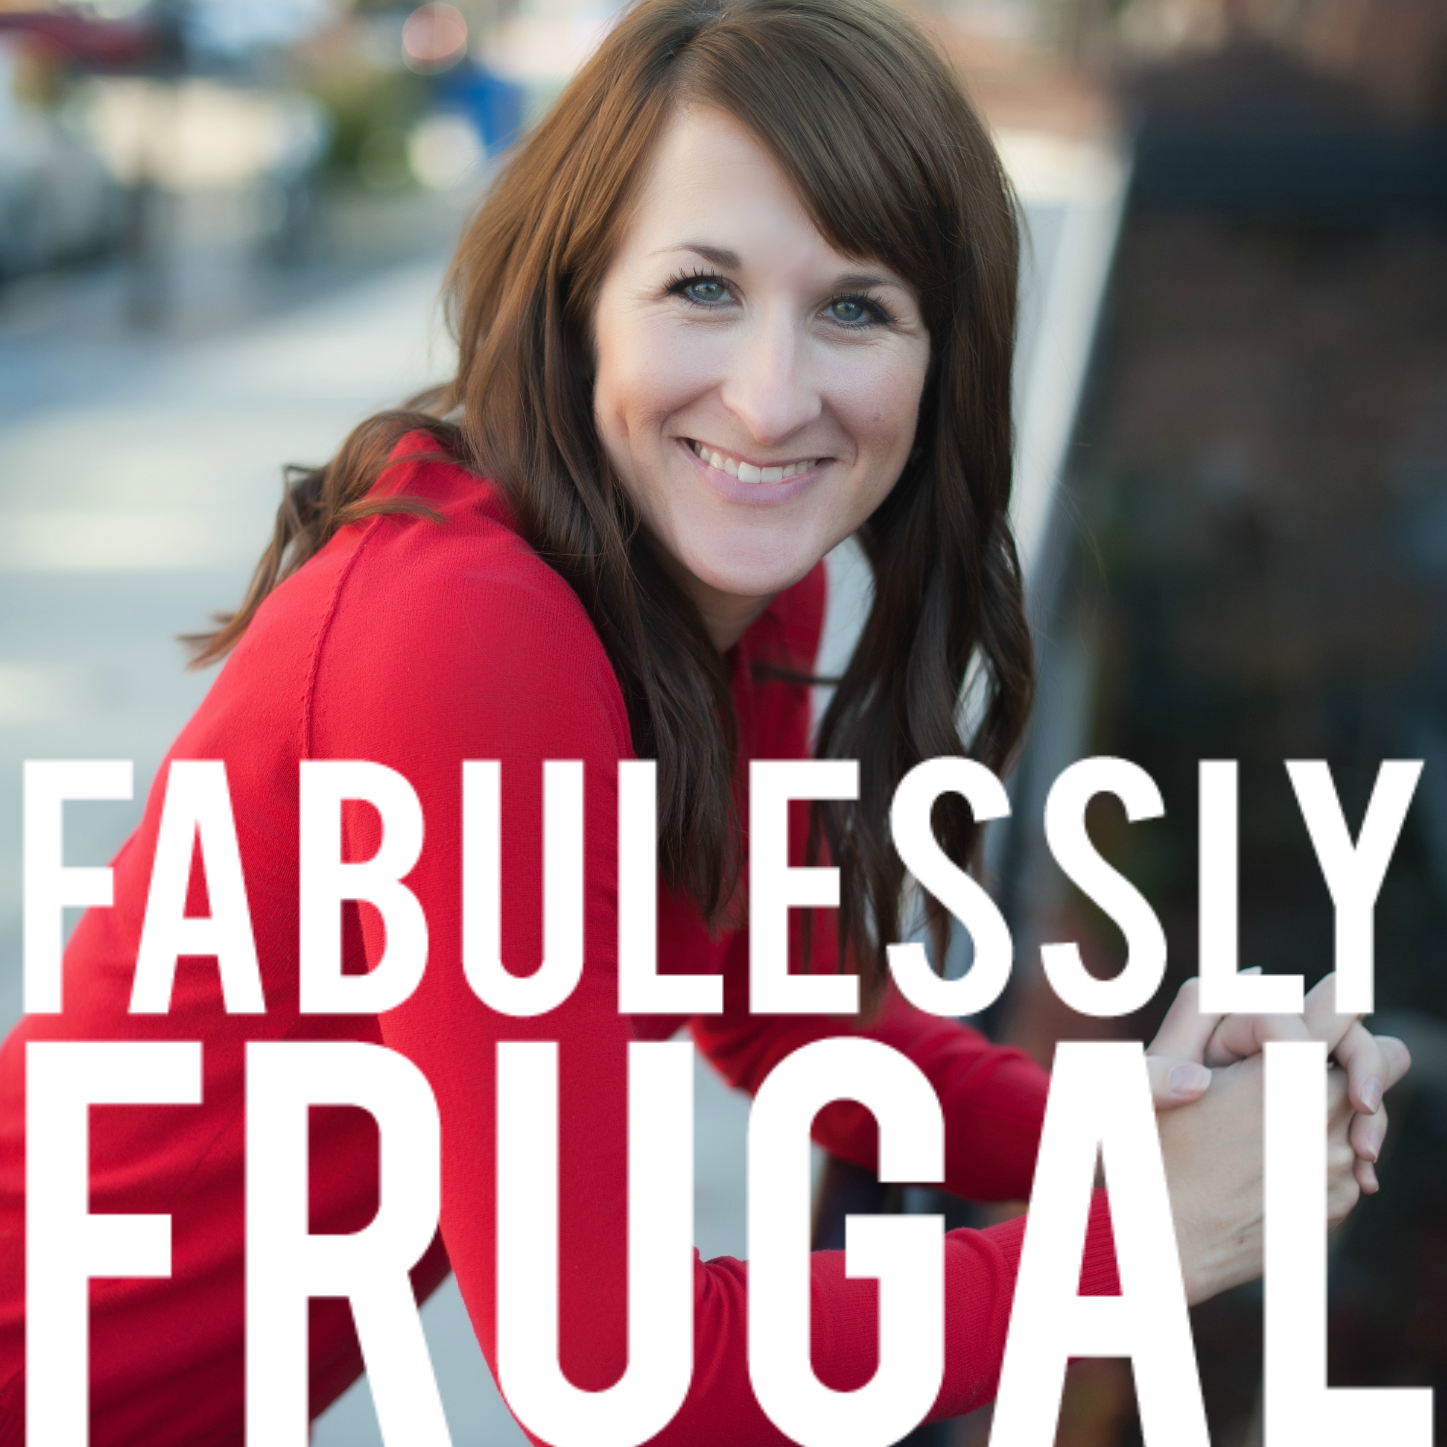 Aen Art Archives - Fabulessly Frugal